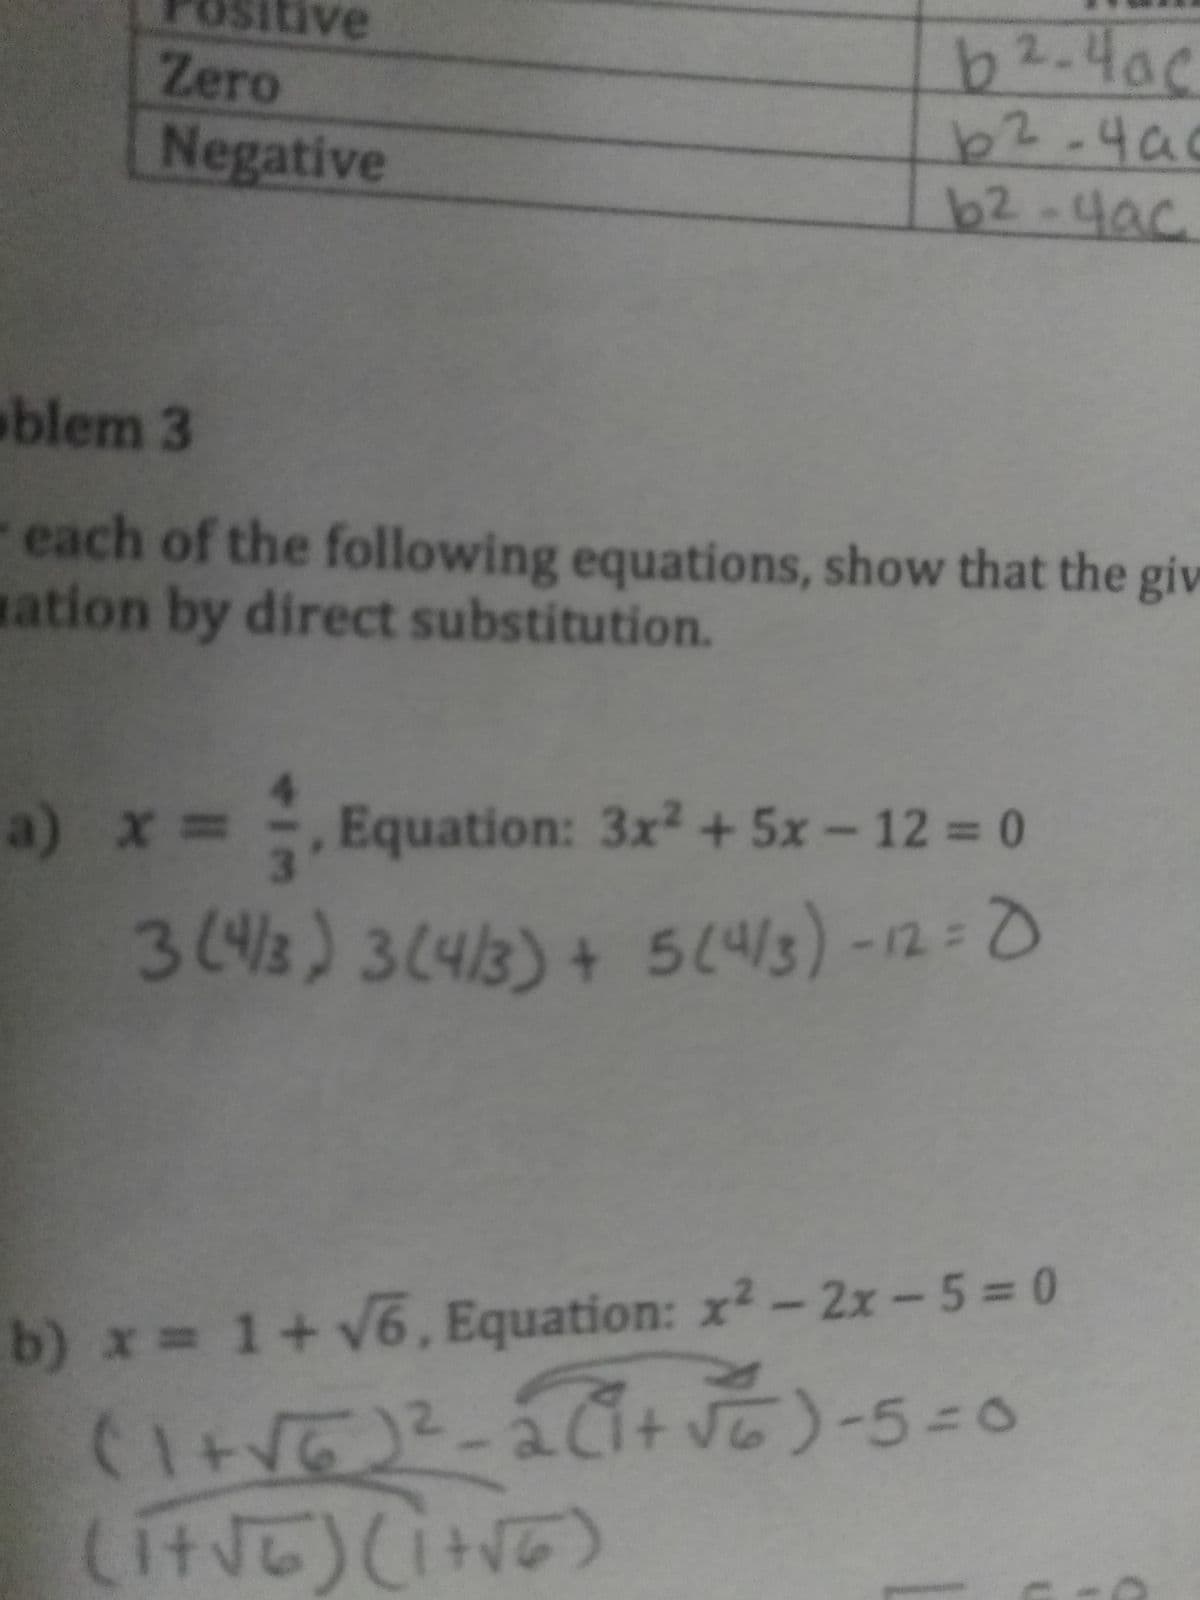 b2.4ac
b2.4a
b2-4ac
Zero
ave
Negative
blem 3
each of the following equations, show that the giv
ation by direct substitution.
a) x =
Equation: 3x² + 5x– 12 = 0
3148)3(4/3)+ 5(43)-12=0
41:
3443
b) x= 1+v6, Equation: x2-2x-5= 0
2.
+
-50
